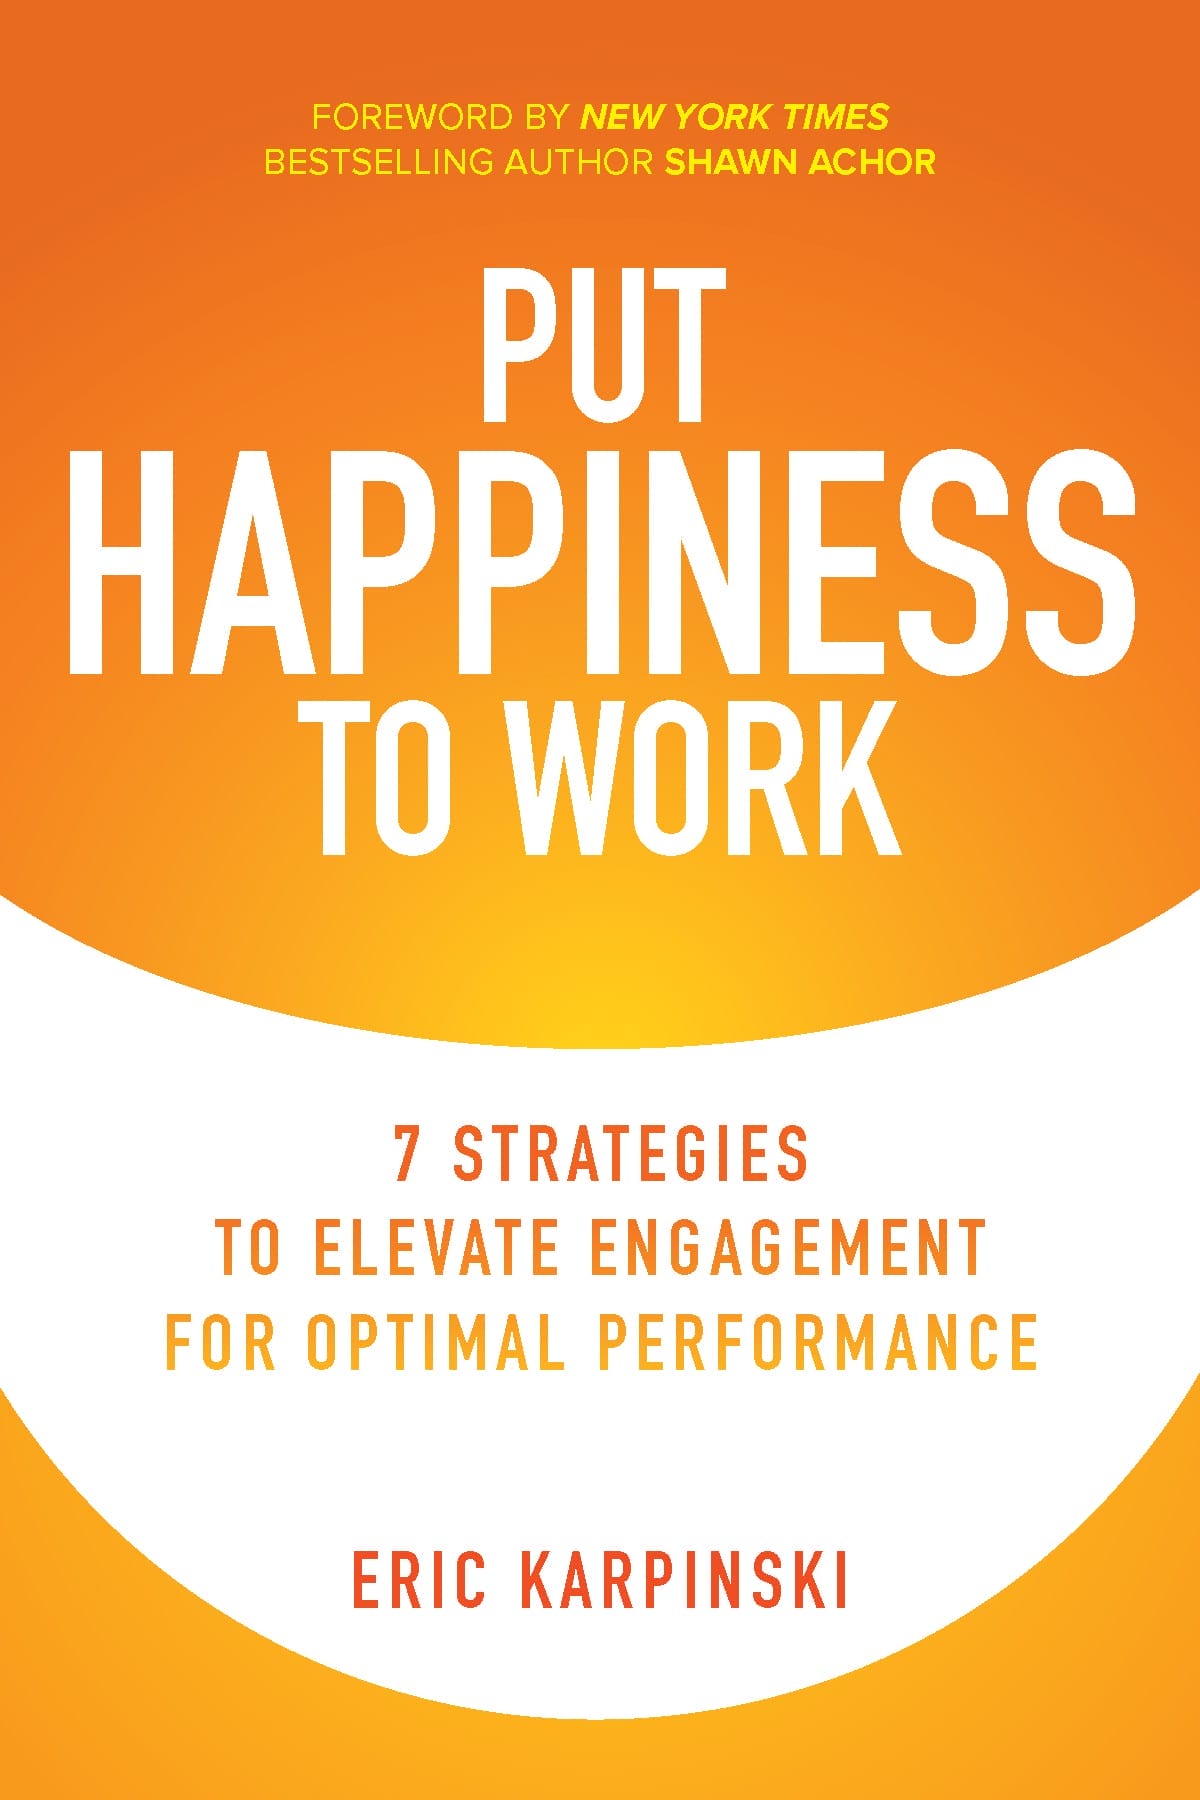 Book titled Put Happiness to Work